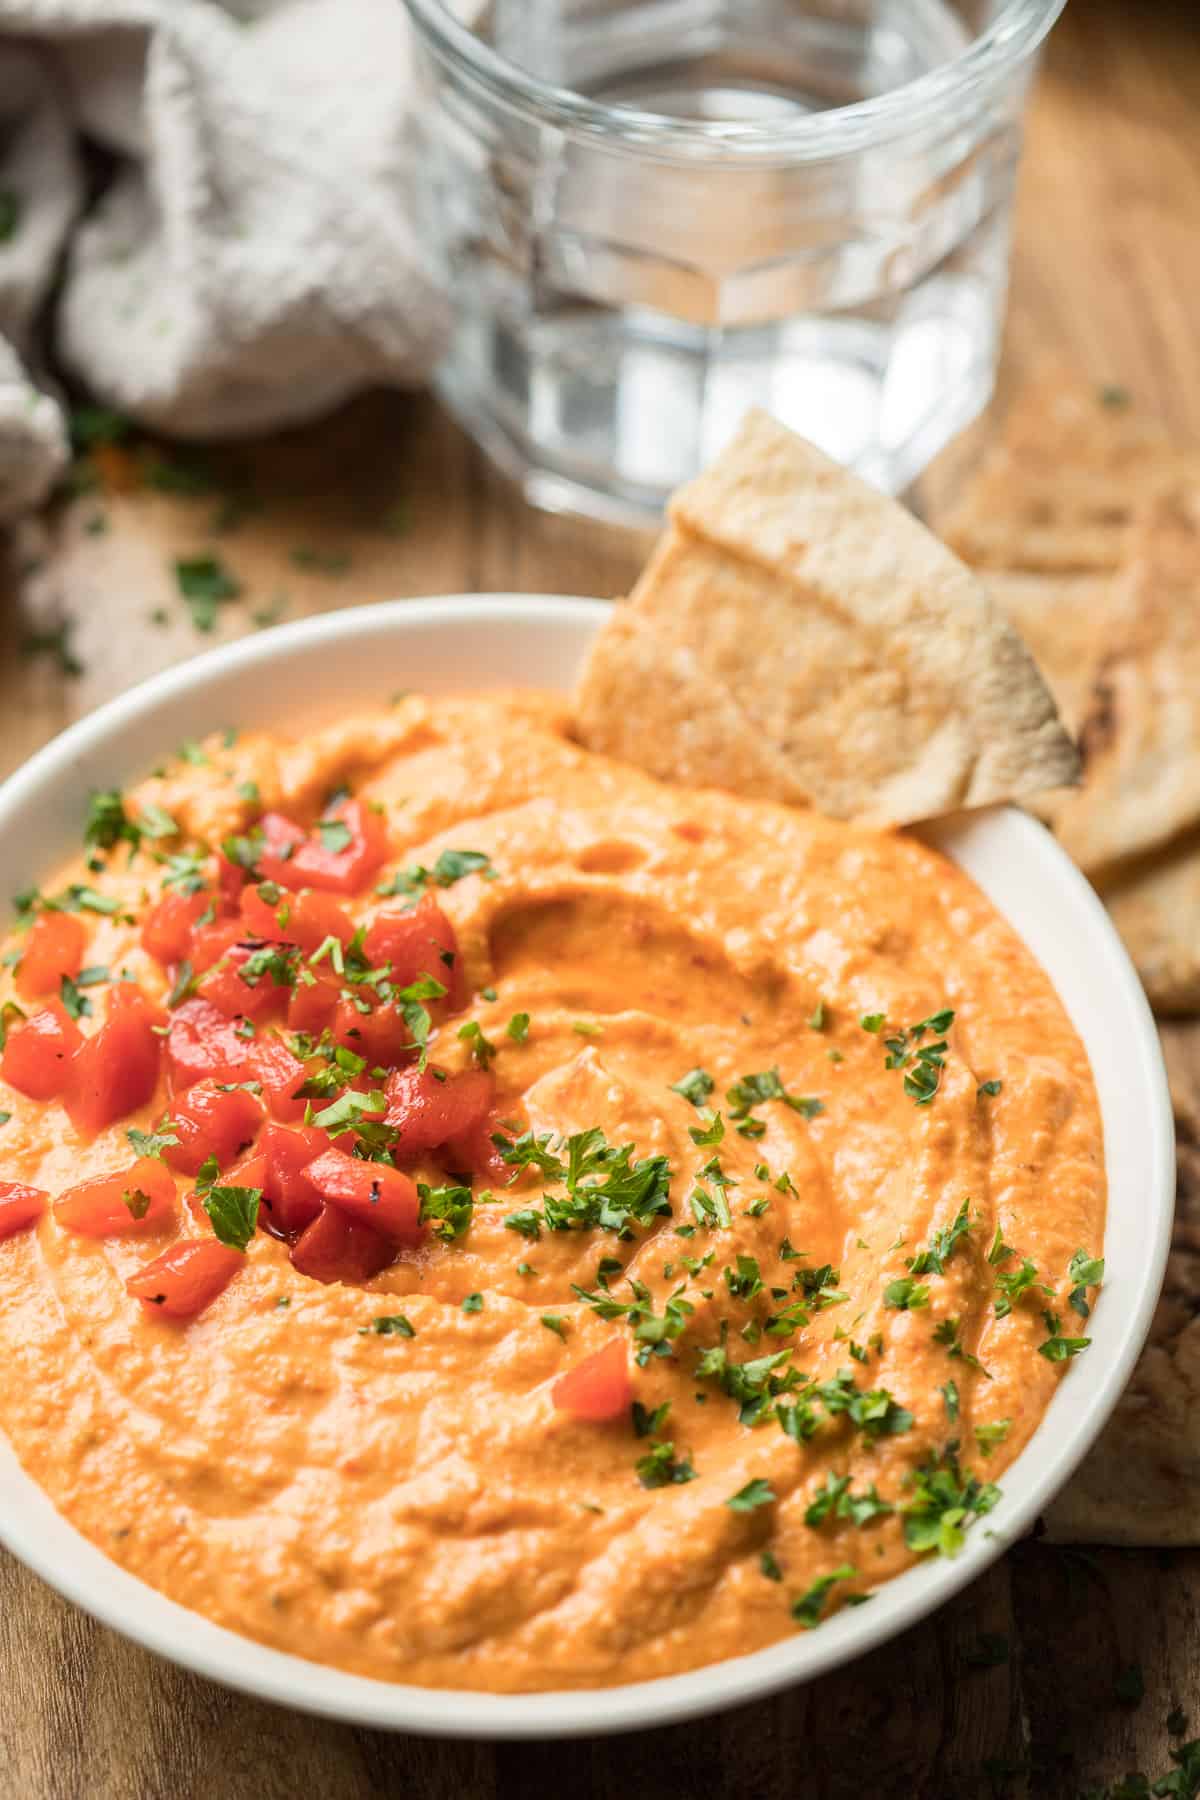 Bowl of Roasted Red Pepper Hummus with Pita Bread and Water Glass in the Background